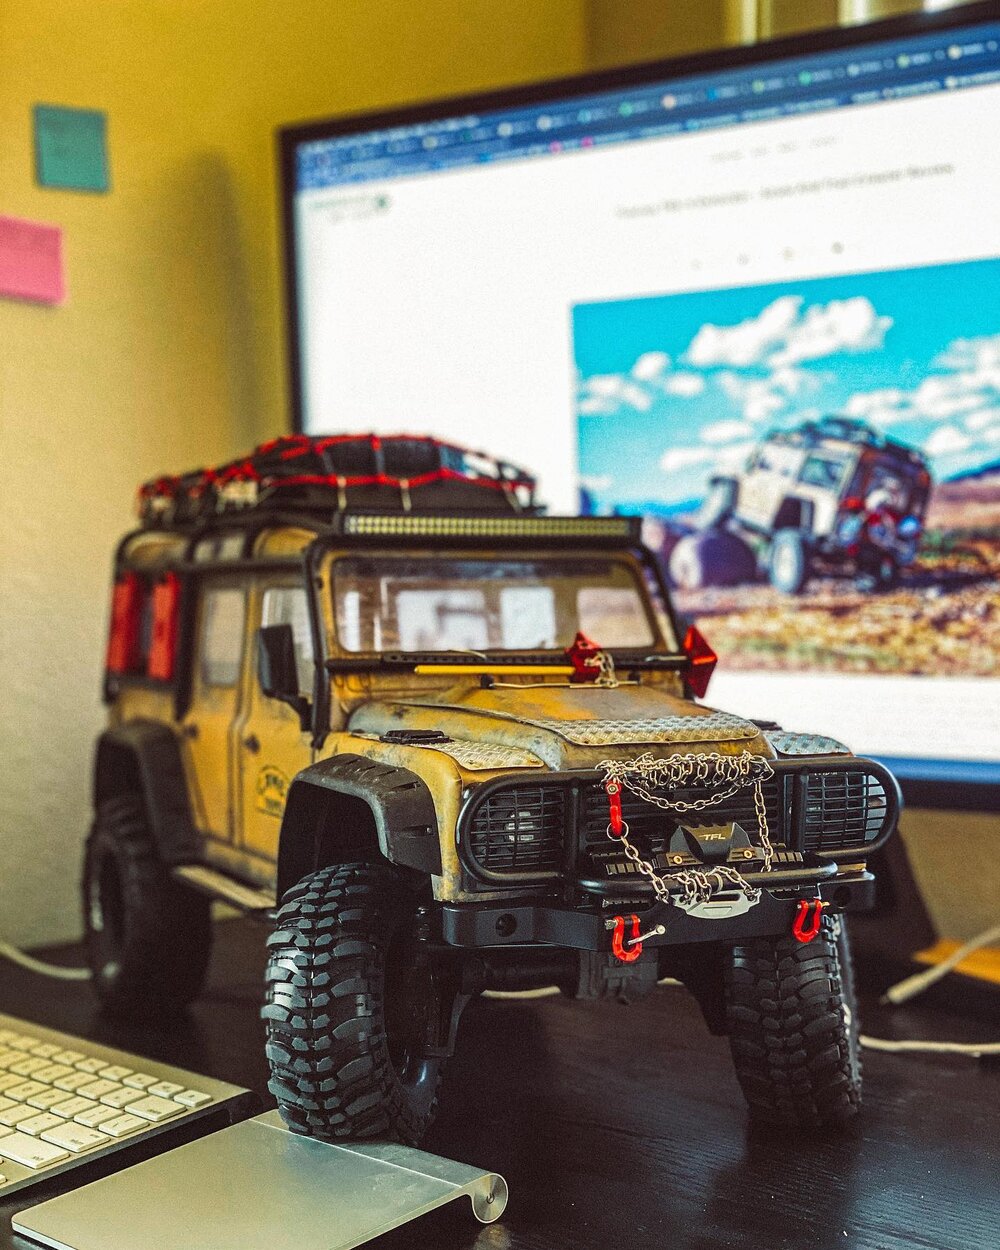 New bumper, wheels &amp; tires. I still need to test them out, but that's what this evening is for!
&mdash;&mdash;&mdash;&mdash;&mdash;&mdash;&mdash;&mdash;&mdash;&mdash;&mdash;&mdash;
#wanderremote #wanderlustnotless
@traxxas 
&mdash;&mdash;&mdash;&